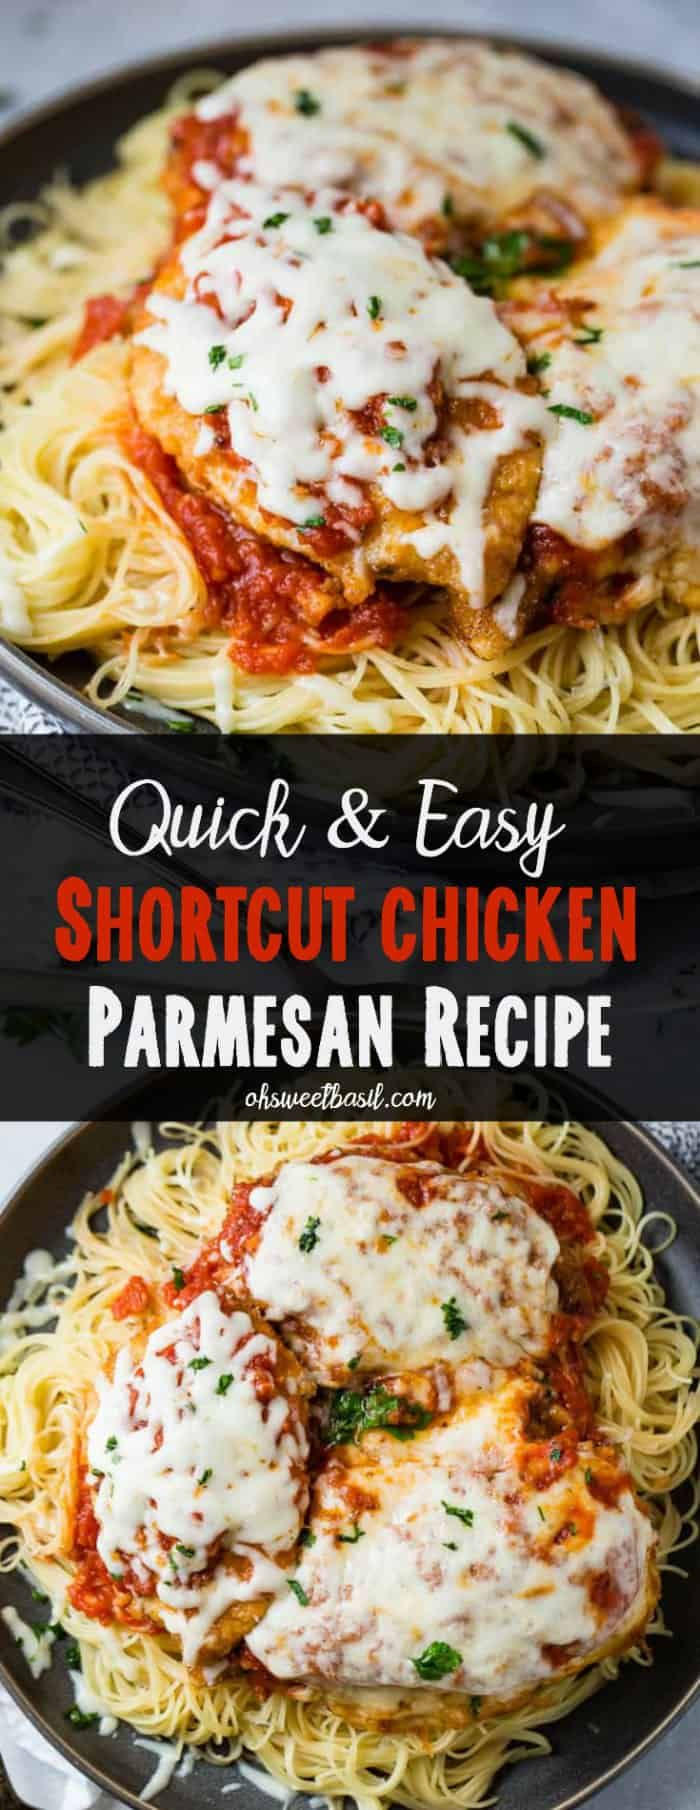 Side Dishes For Chicken Parmesan
 Quick and Easy shortcut Chicken Parmesan